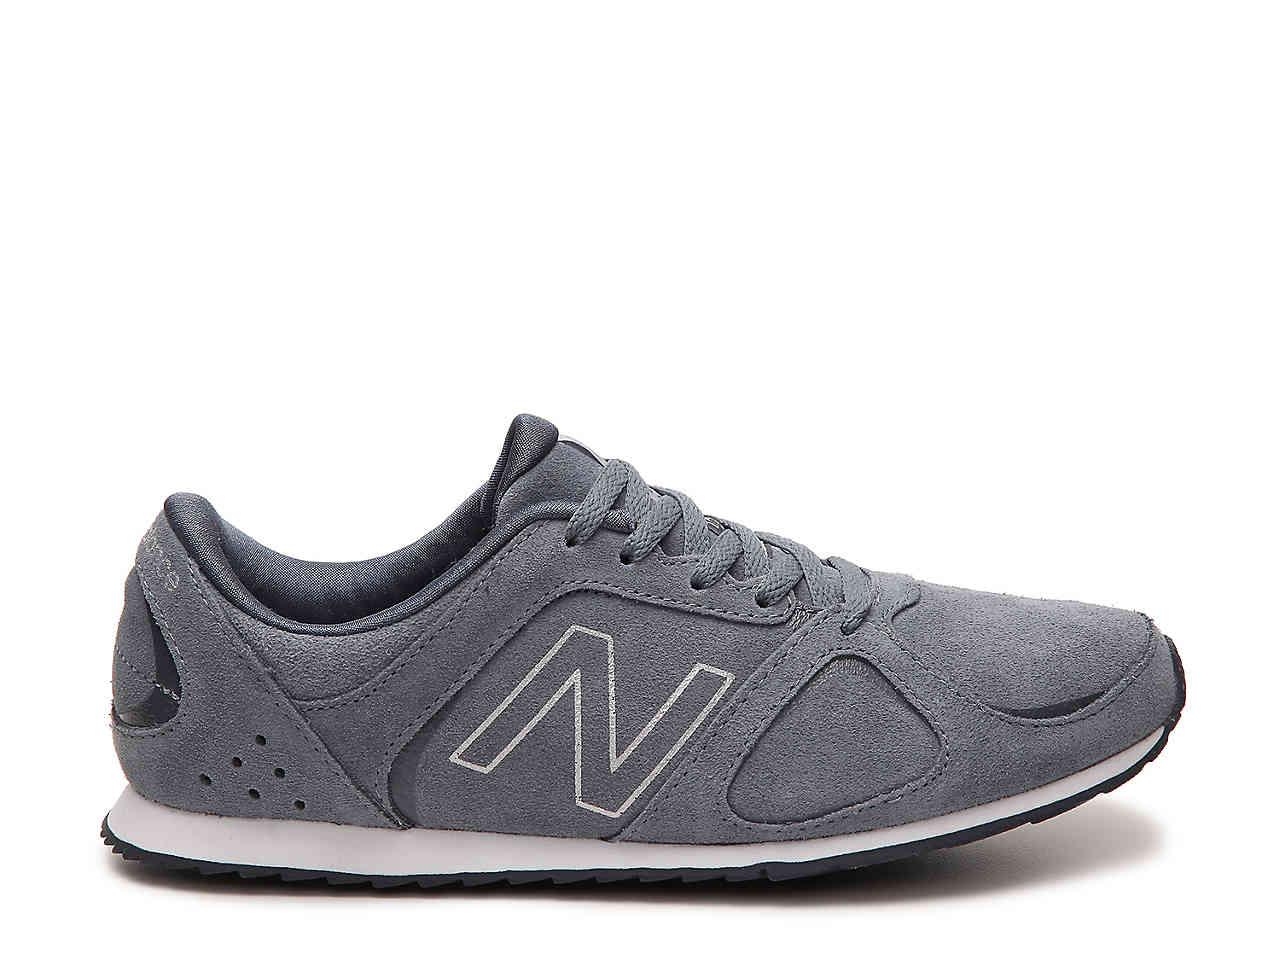 New Balance 555 Retro Suede Sneaker in Gray | Lyst